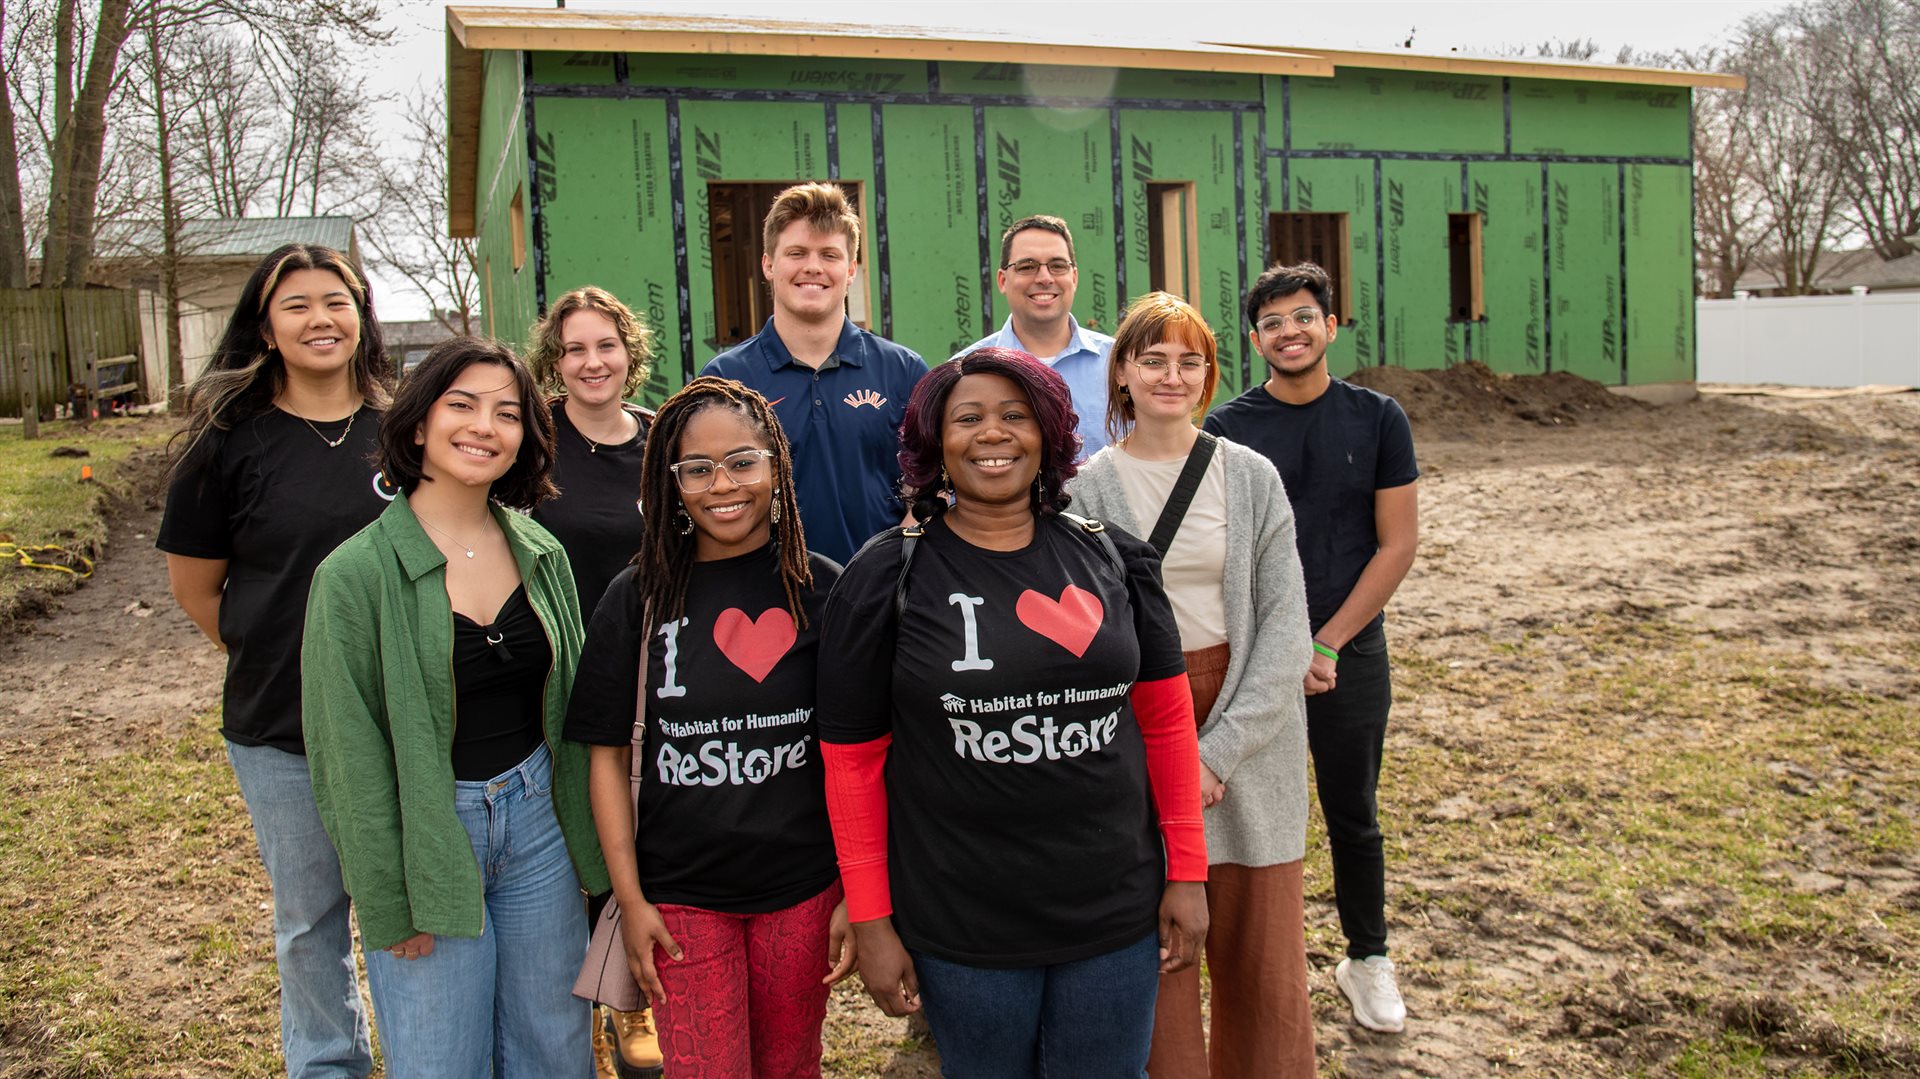 Halie Collins, foreground left, joins fellow Student members of Illinois Solar Decathlon and Elonda Elston, foreground right, and her daughter, Monae Latchison, center, for a group photo in front of their future home at the RENU Home/Habitat for Humanity site in Rantoul. Habitat Executive Director Chad Hoffman is pictured back row, second from right.